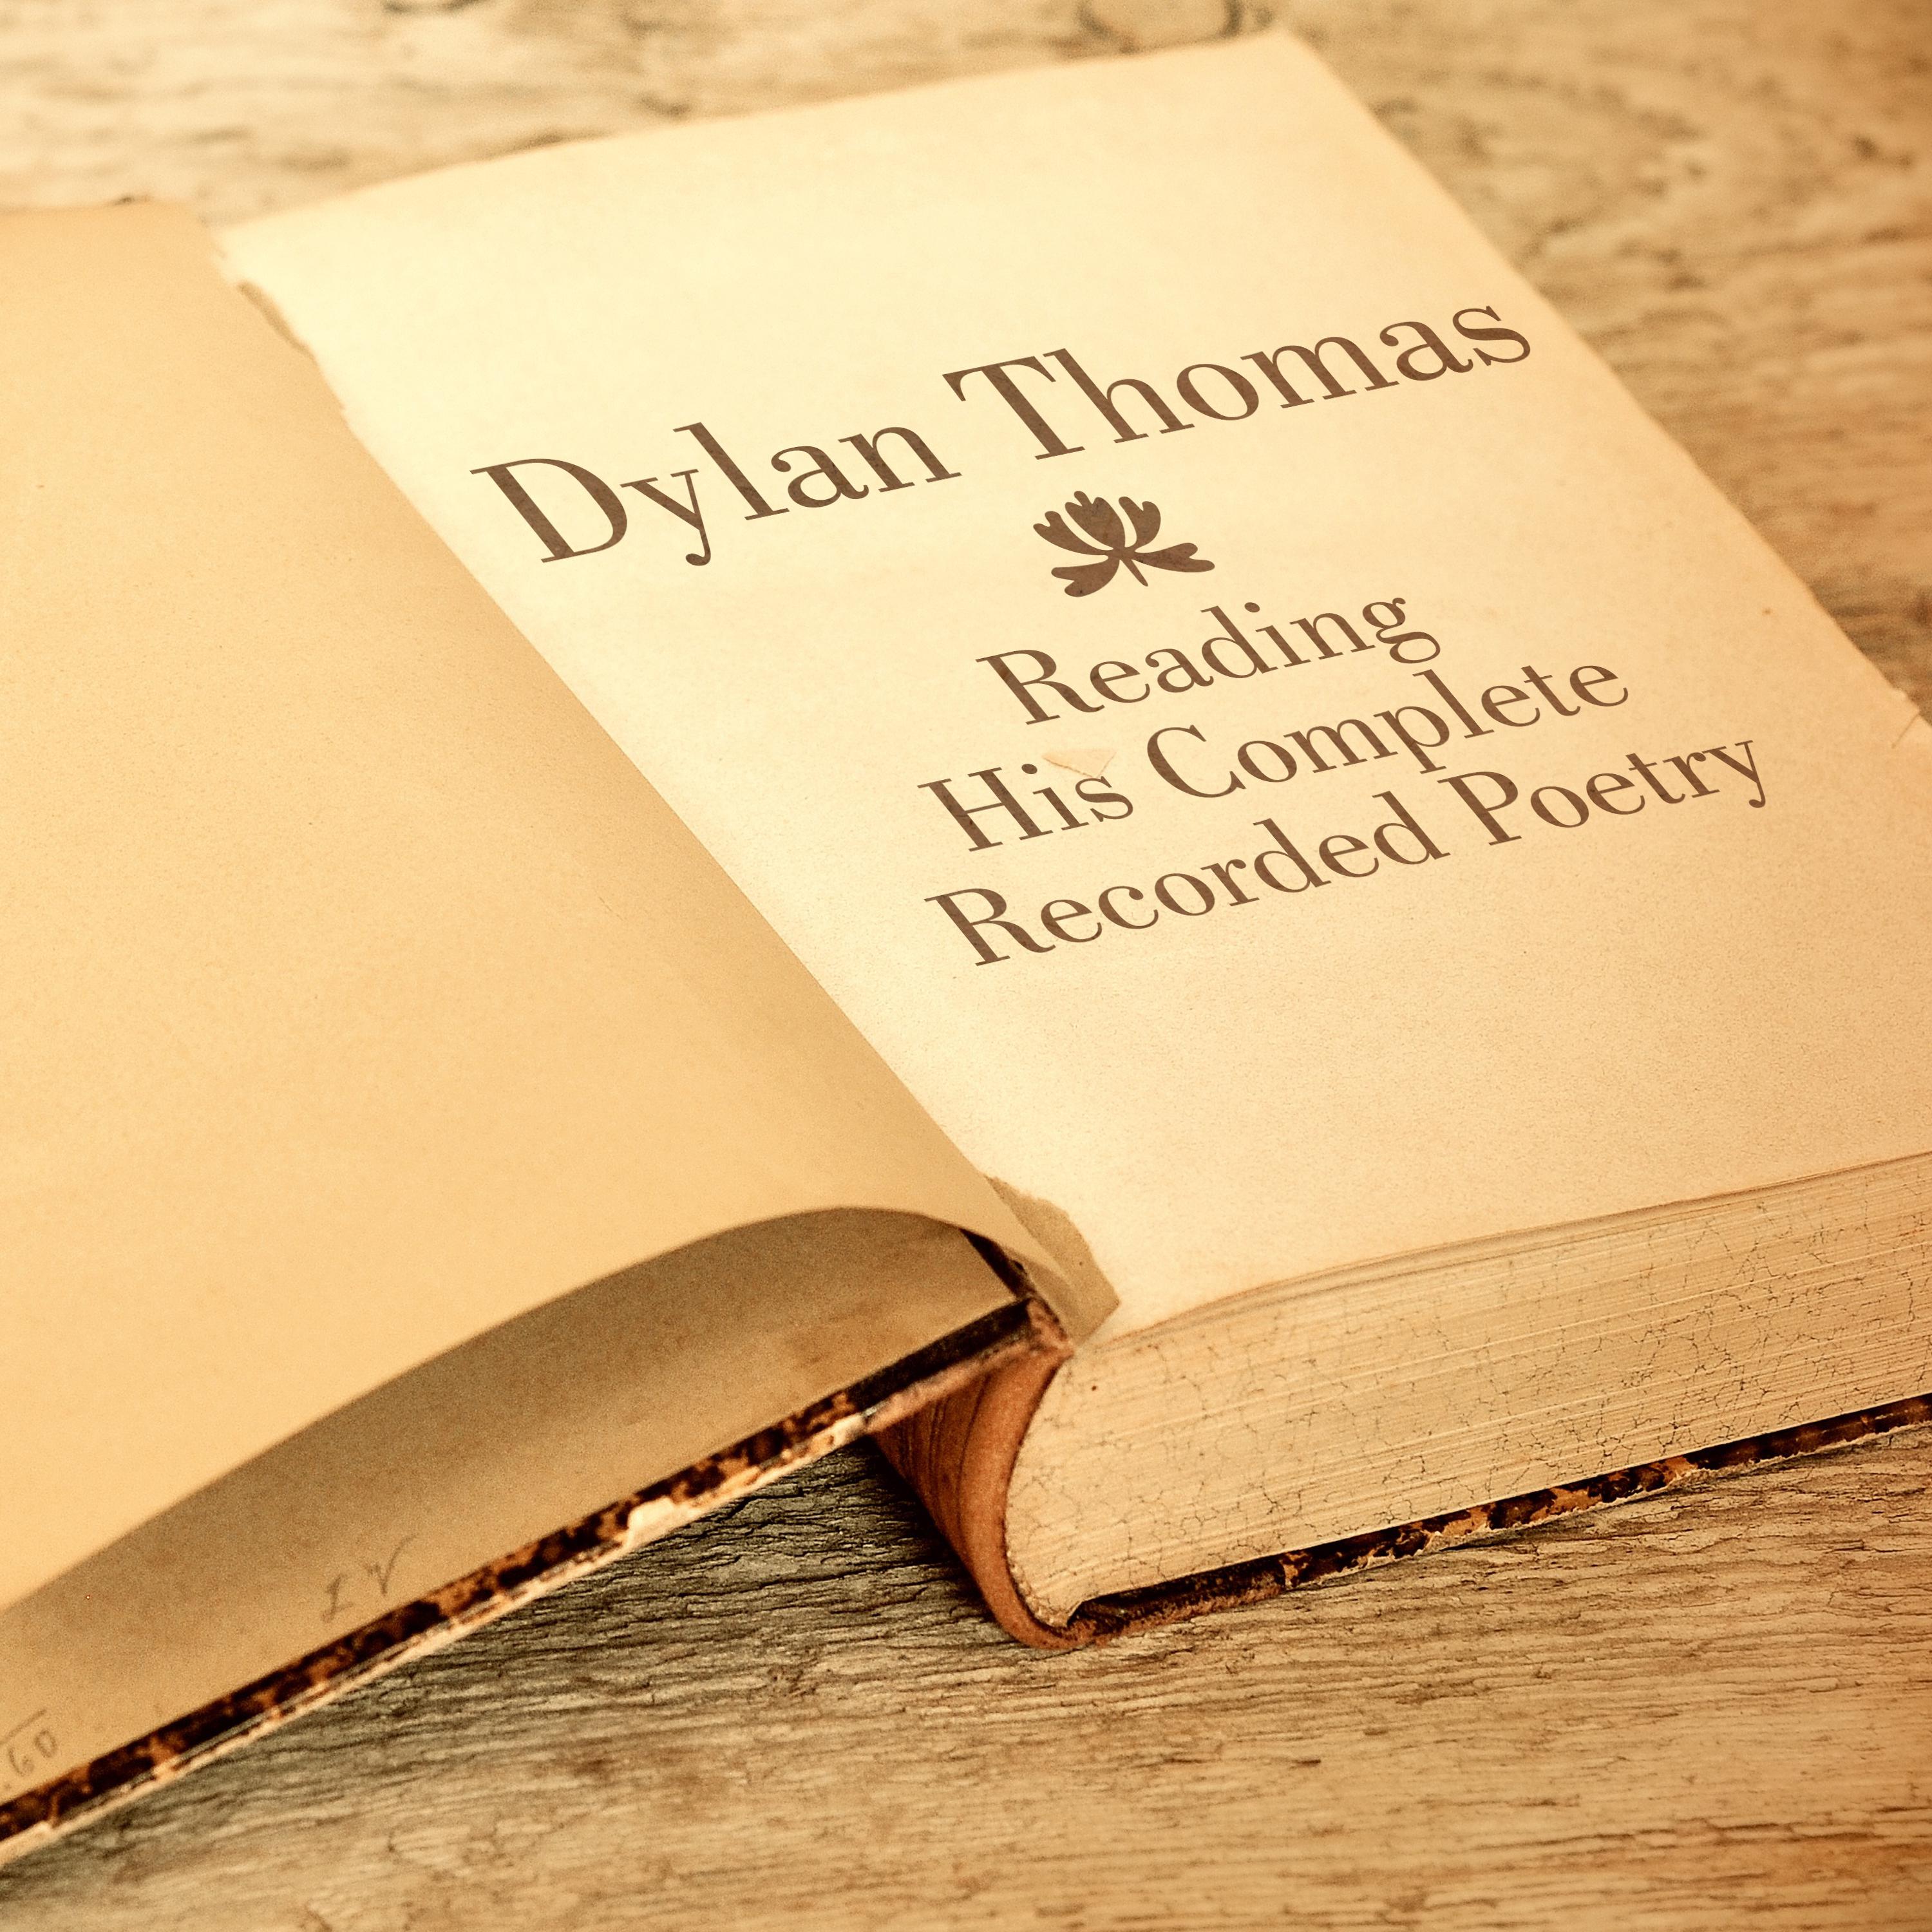 Dylan Thomas Reading His Complete Recorded Poetry